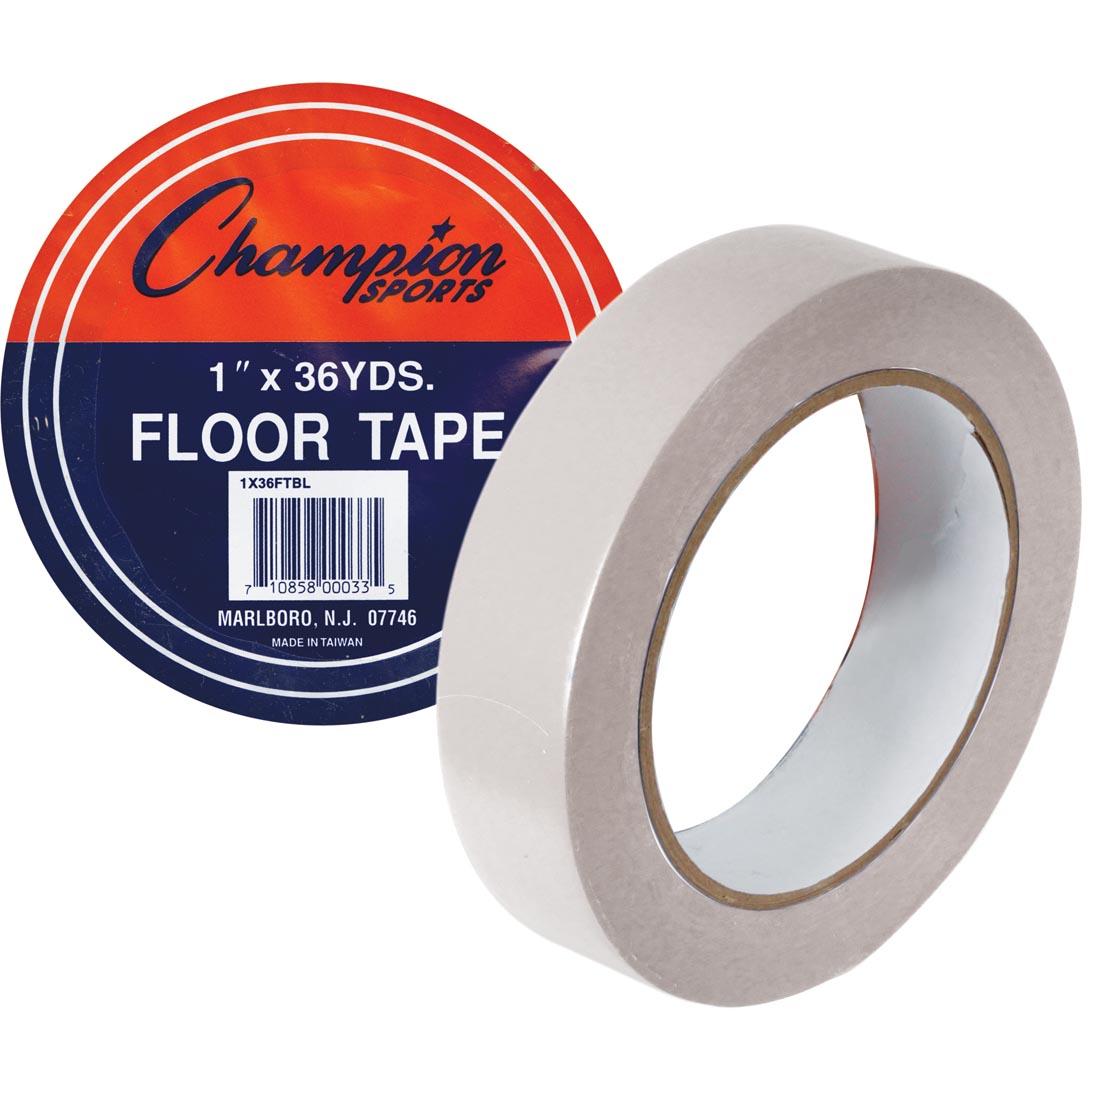 White Floor Tape by Champion Sports